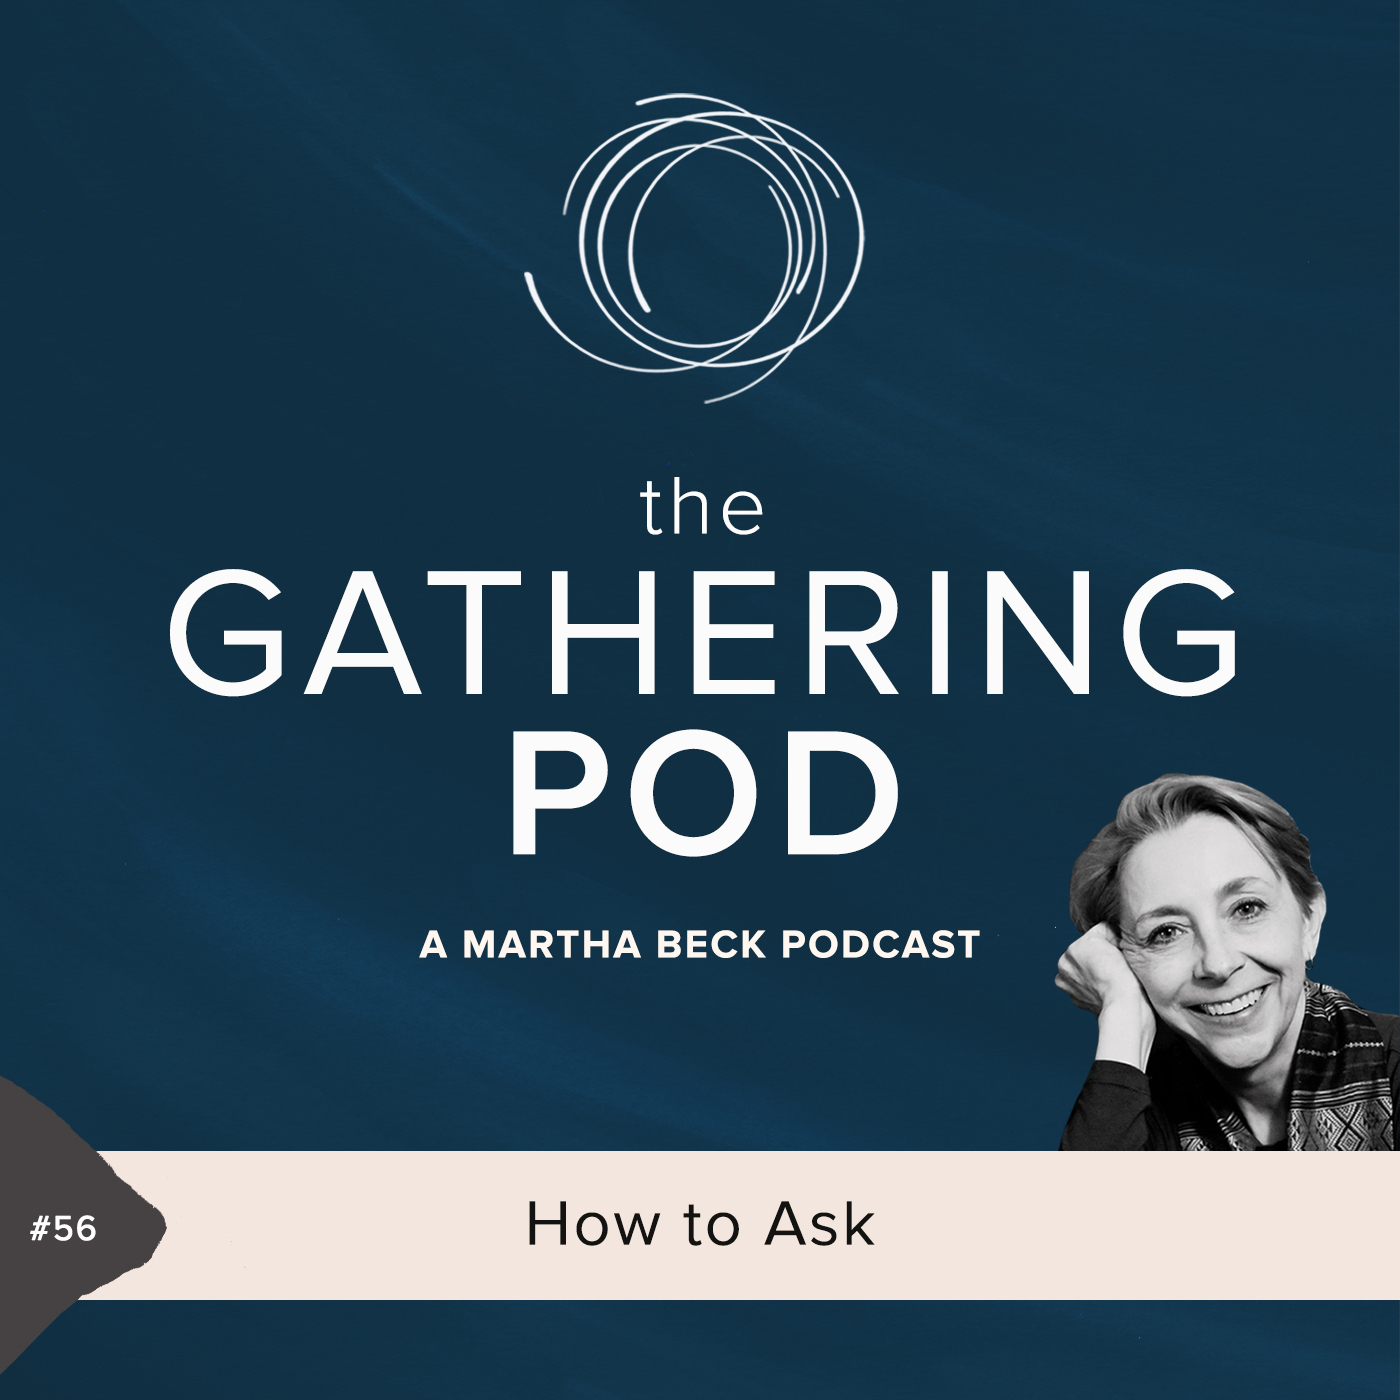 Image for The Gathering Pod A Martha Beck Podcast Episode #56 How to Ask